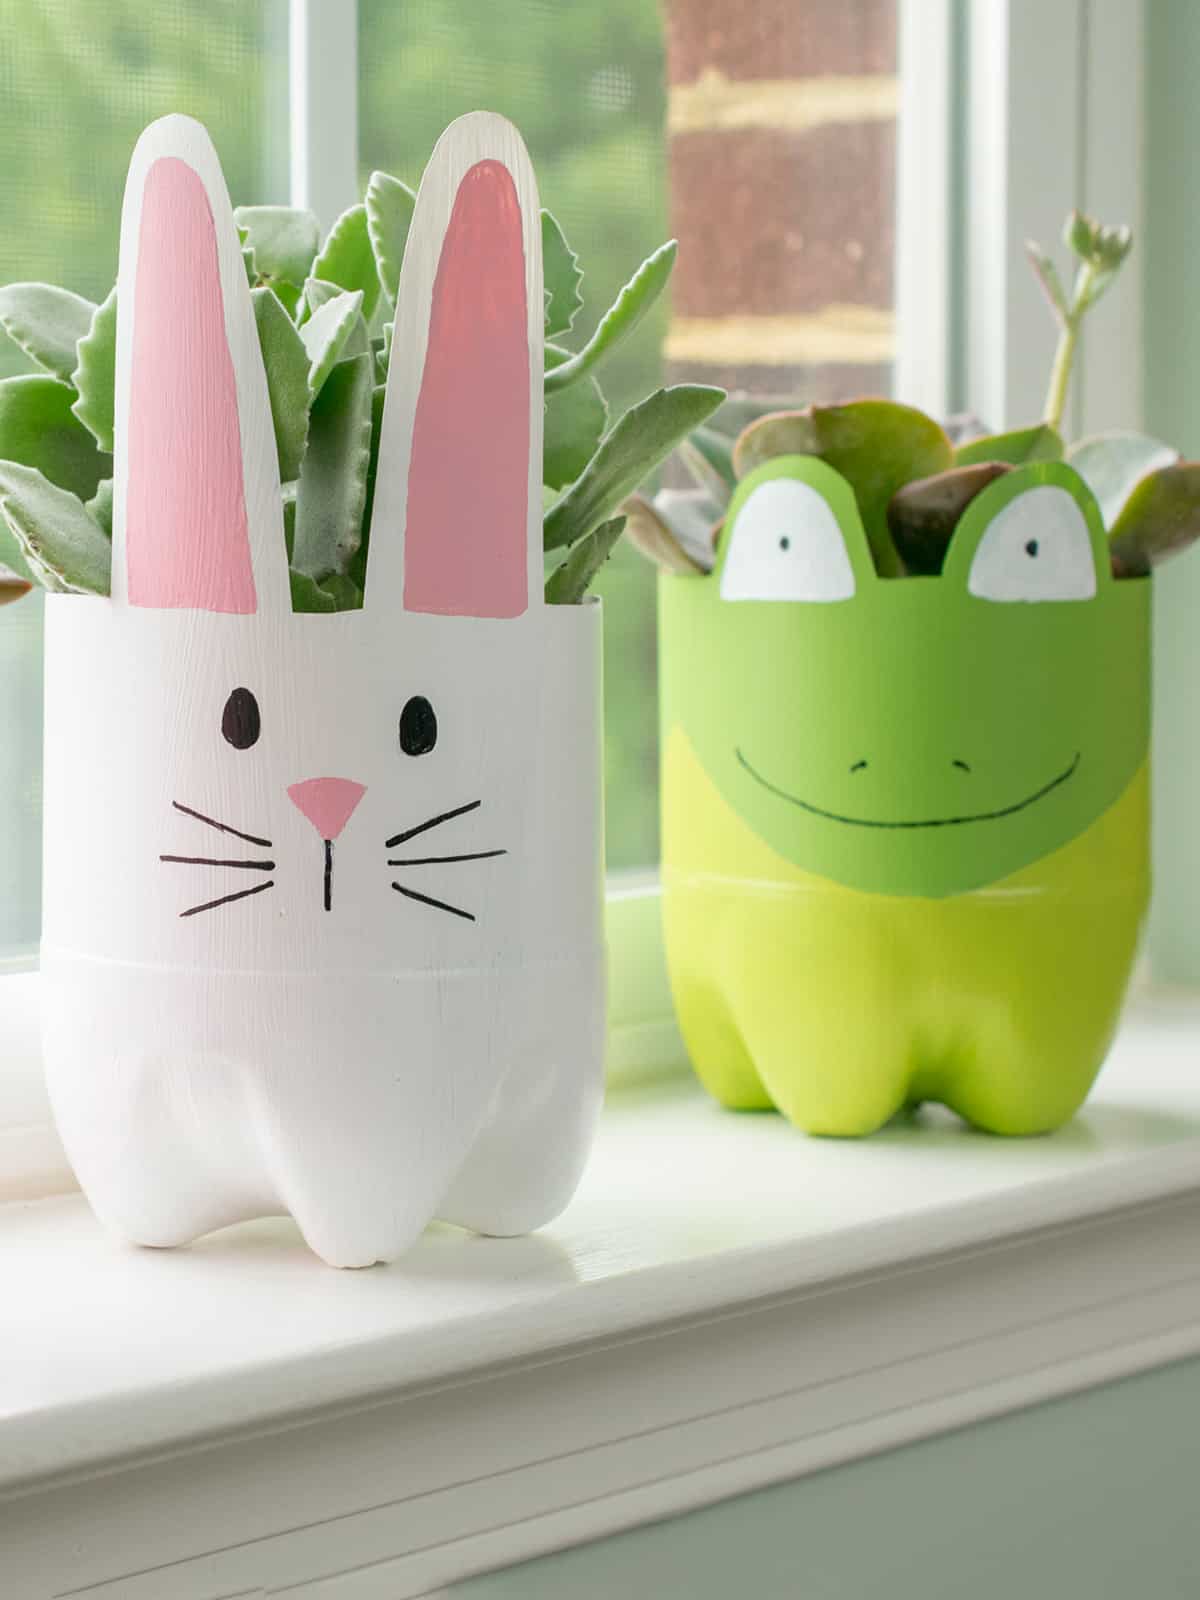 These recycled plastic bottle planters are so adorable and can be self watering planters . They are perfect for a cactus or succulent!